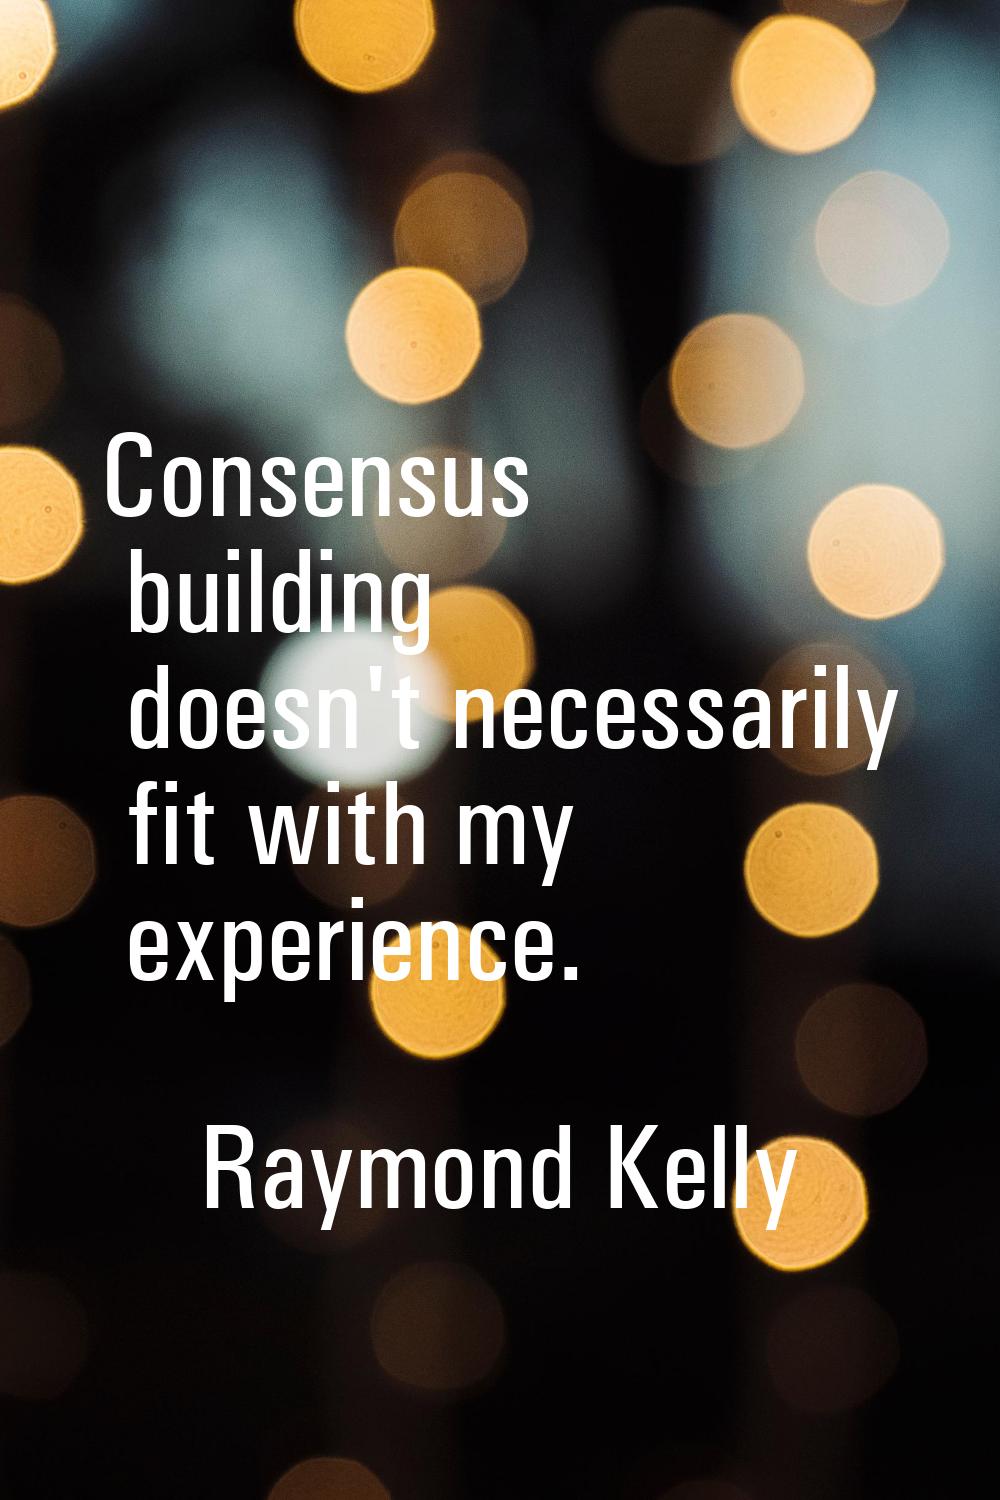 Consensus building doesn't necessarily fit with my experience.